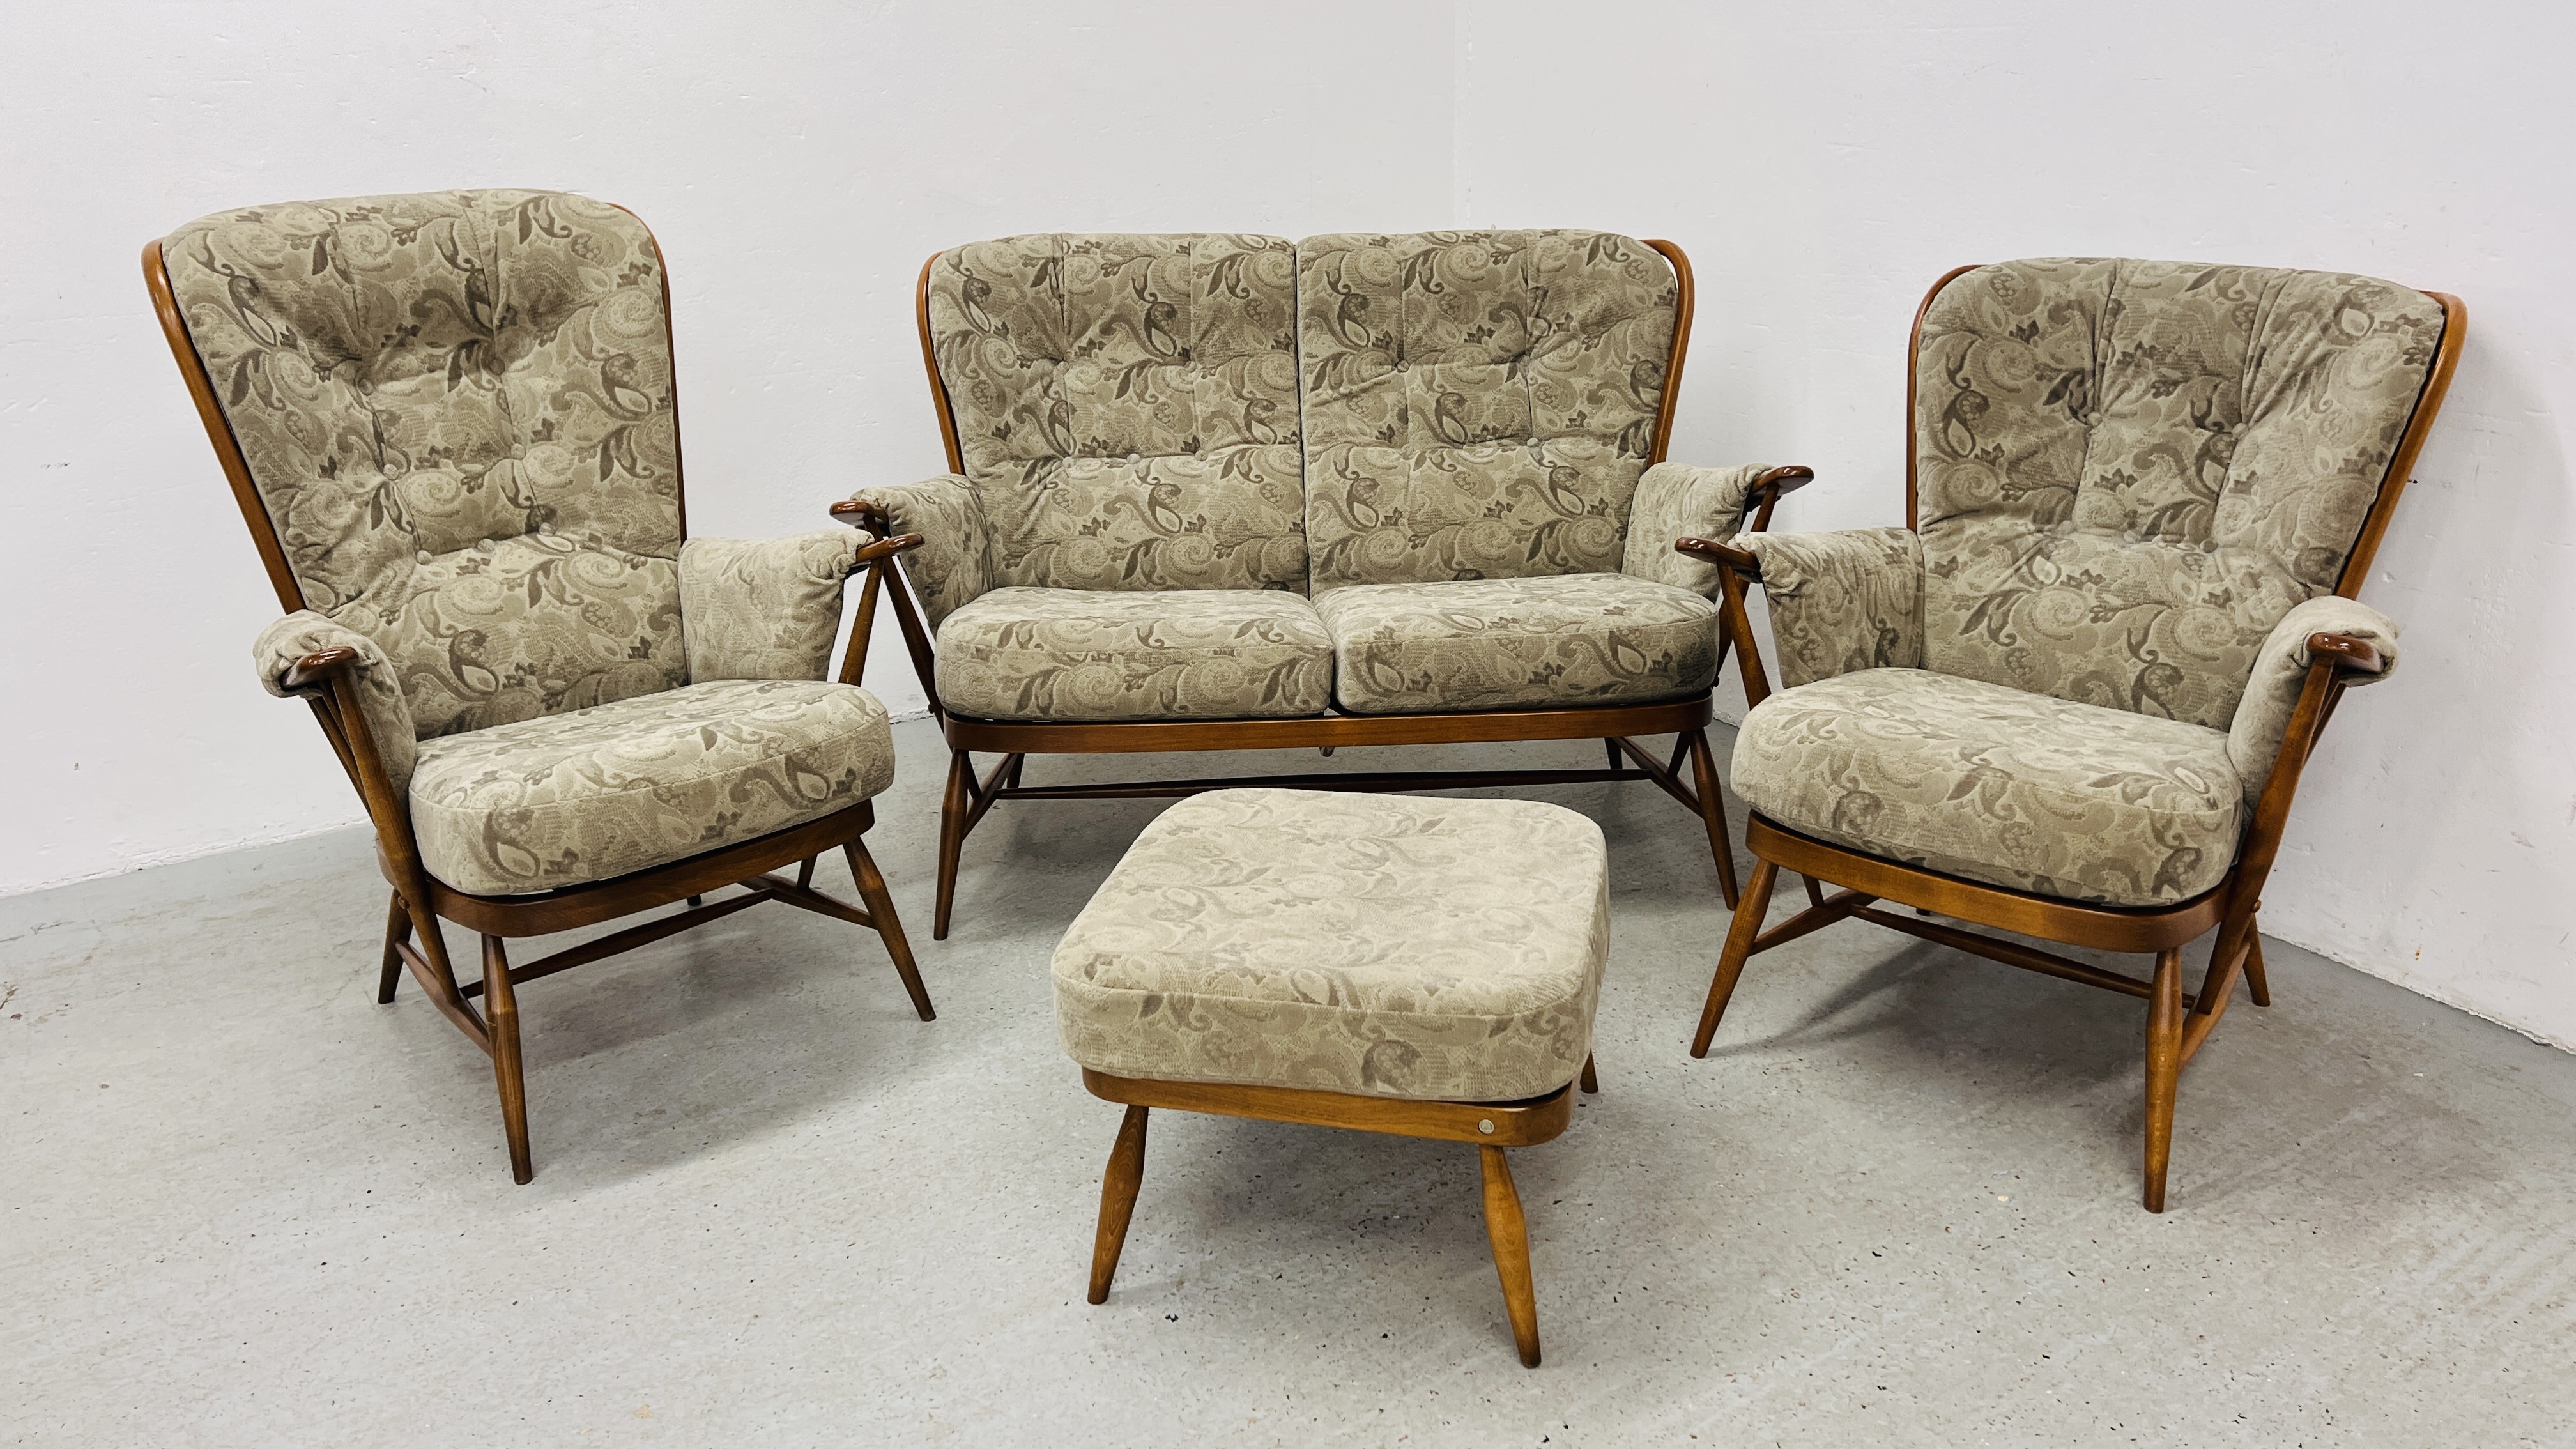 AN ERCOL "GOLDEN DAWN" FINISH COTTAGE THREE PIECE LOUNGE SUITE WITH MATCHING FOOTSTOOL - TRADE ONLY.